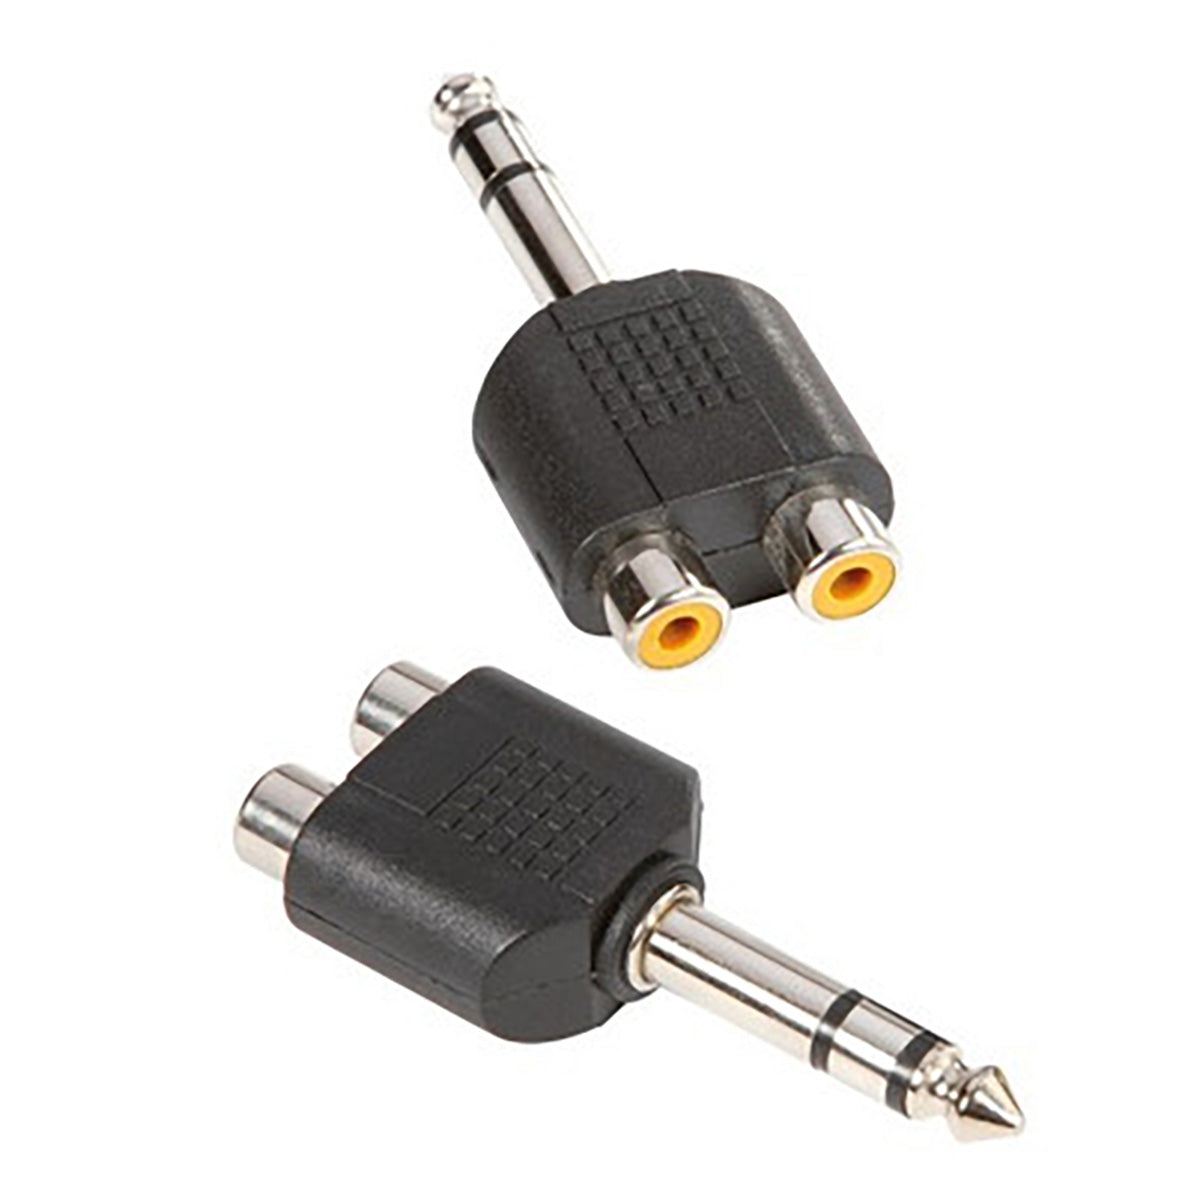 Double Jack 6.3 mm stereo female adapter to 6.3 mm male stereo jack, black  plastic body